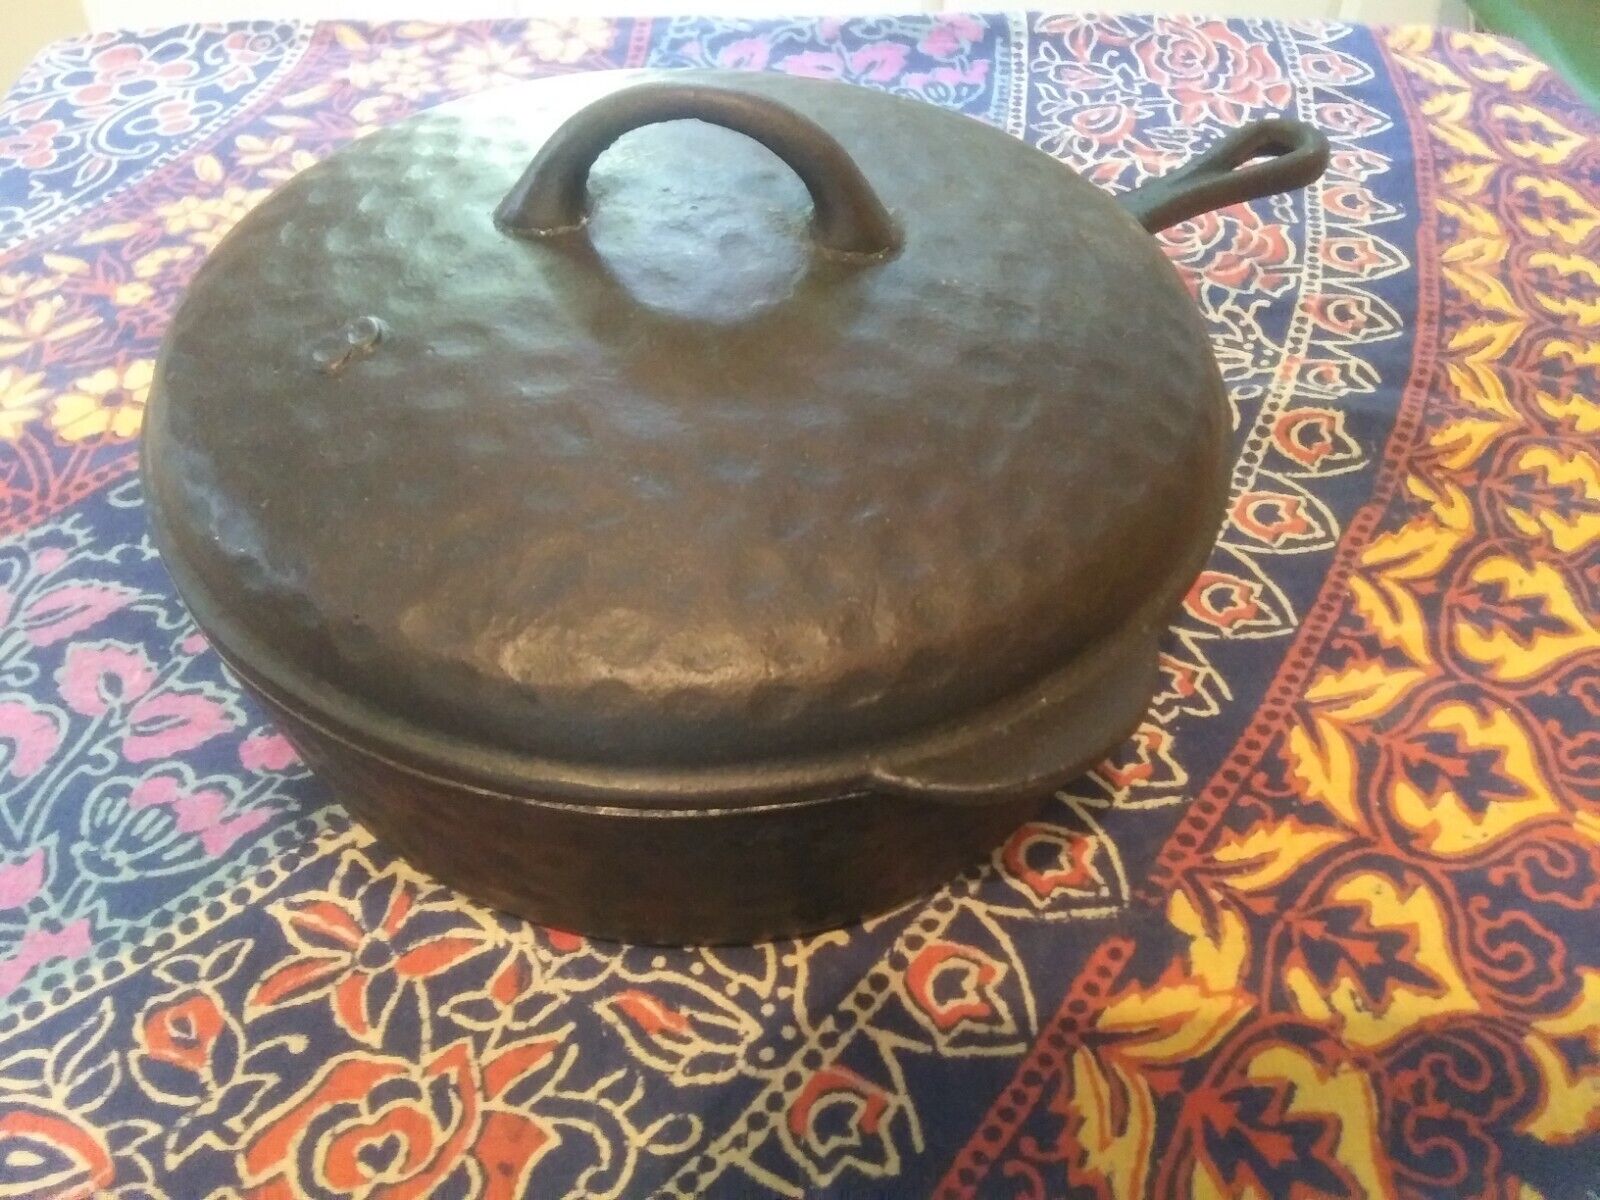 Ugly Hammered Chicken Fryer #8 Cast Iron Pan 